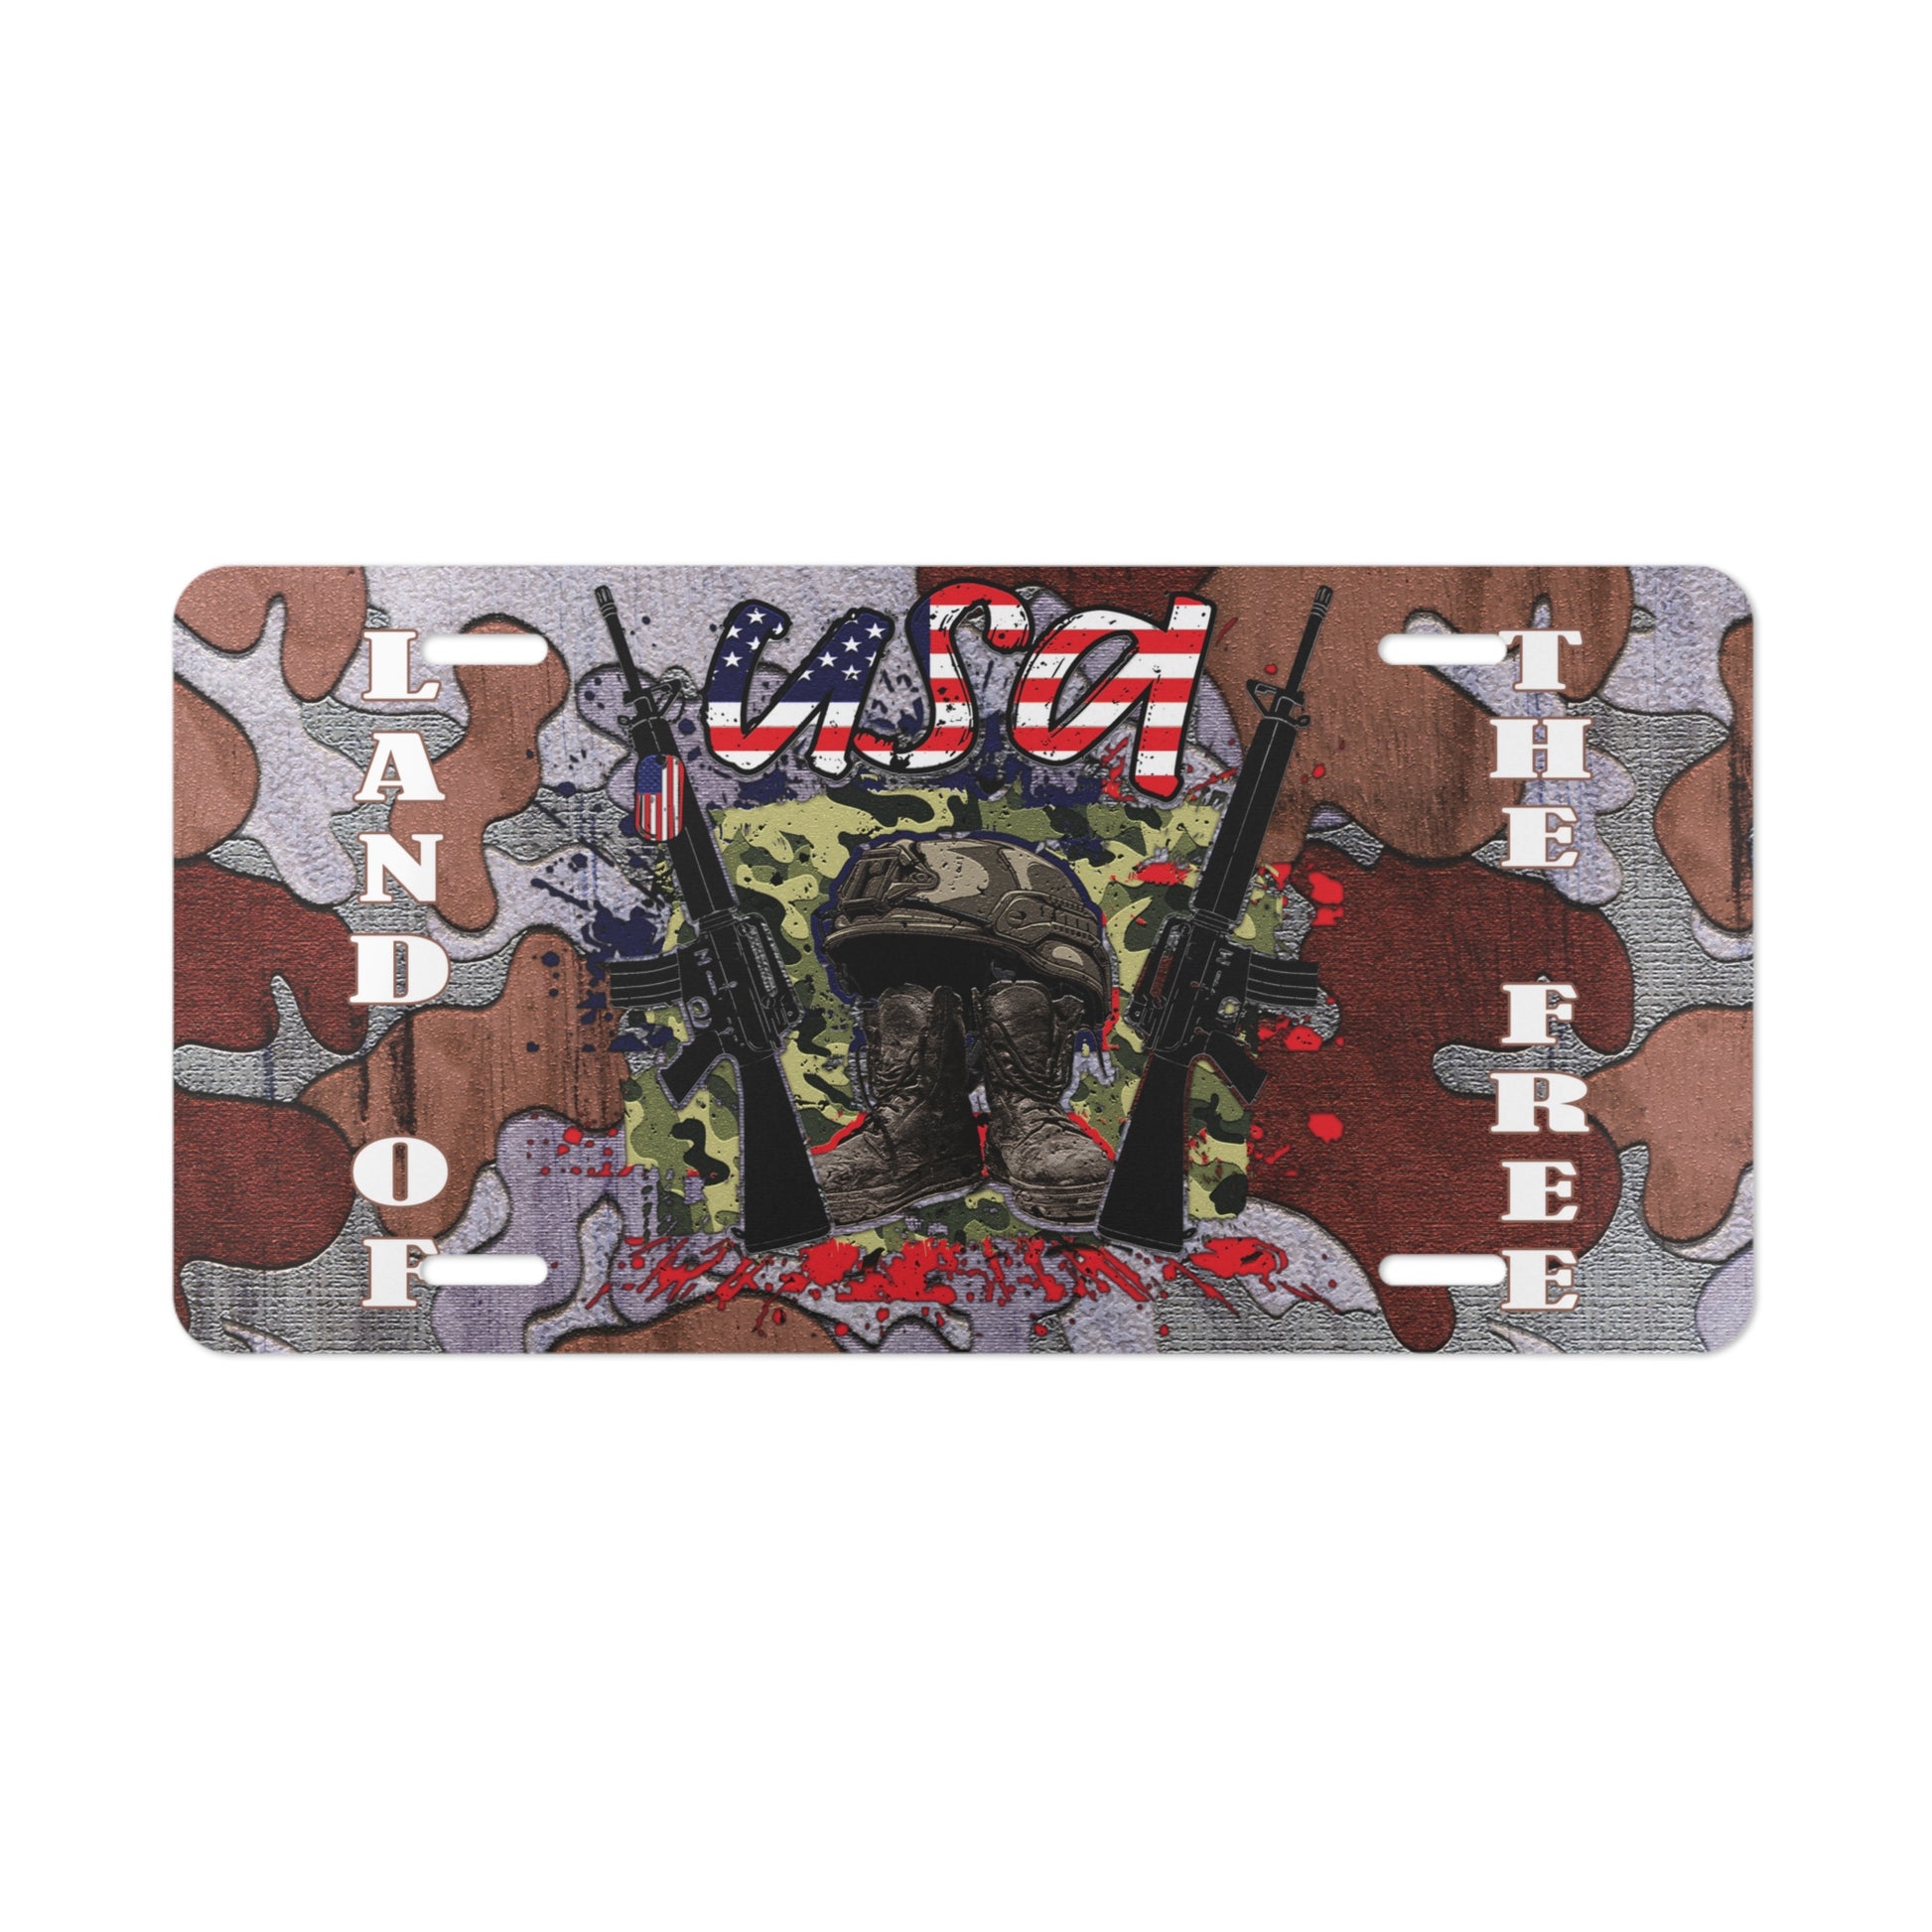 "USA Land Of The Free" Vanity License Plate - Weave Got Gifts - Unique Gifts You Won’t Find Anywhere Else!